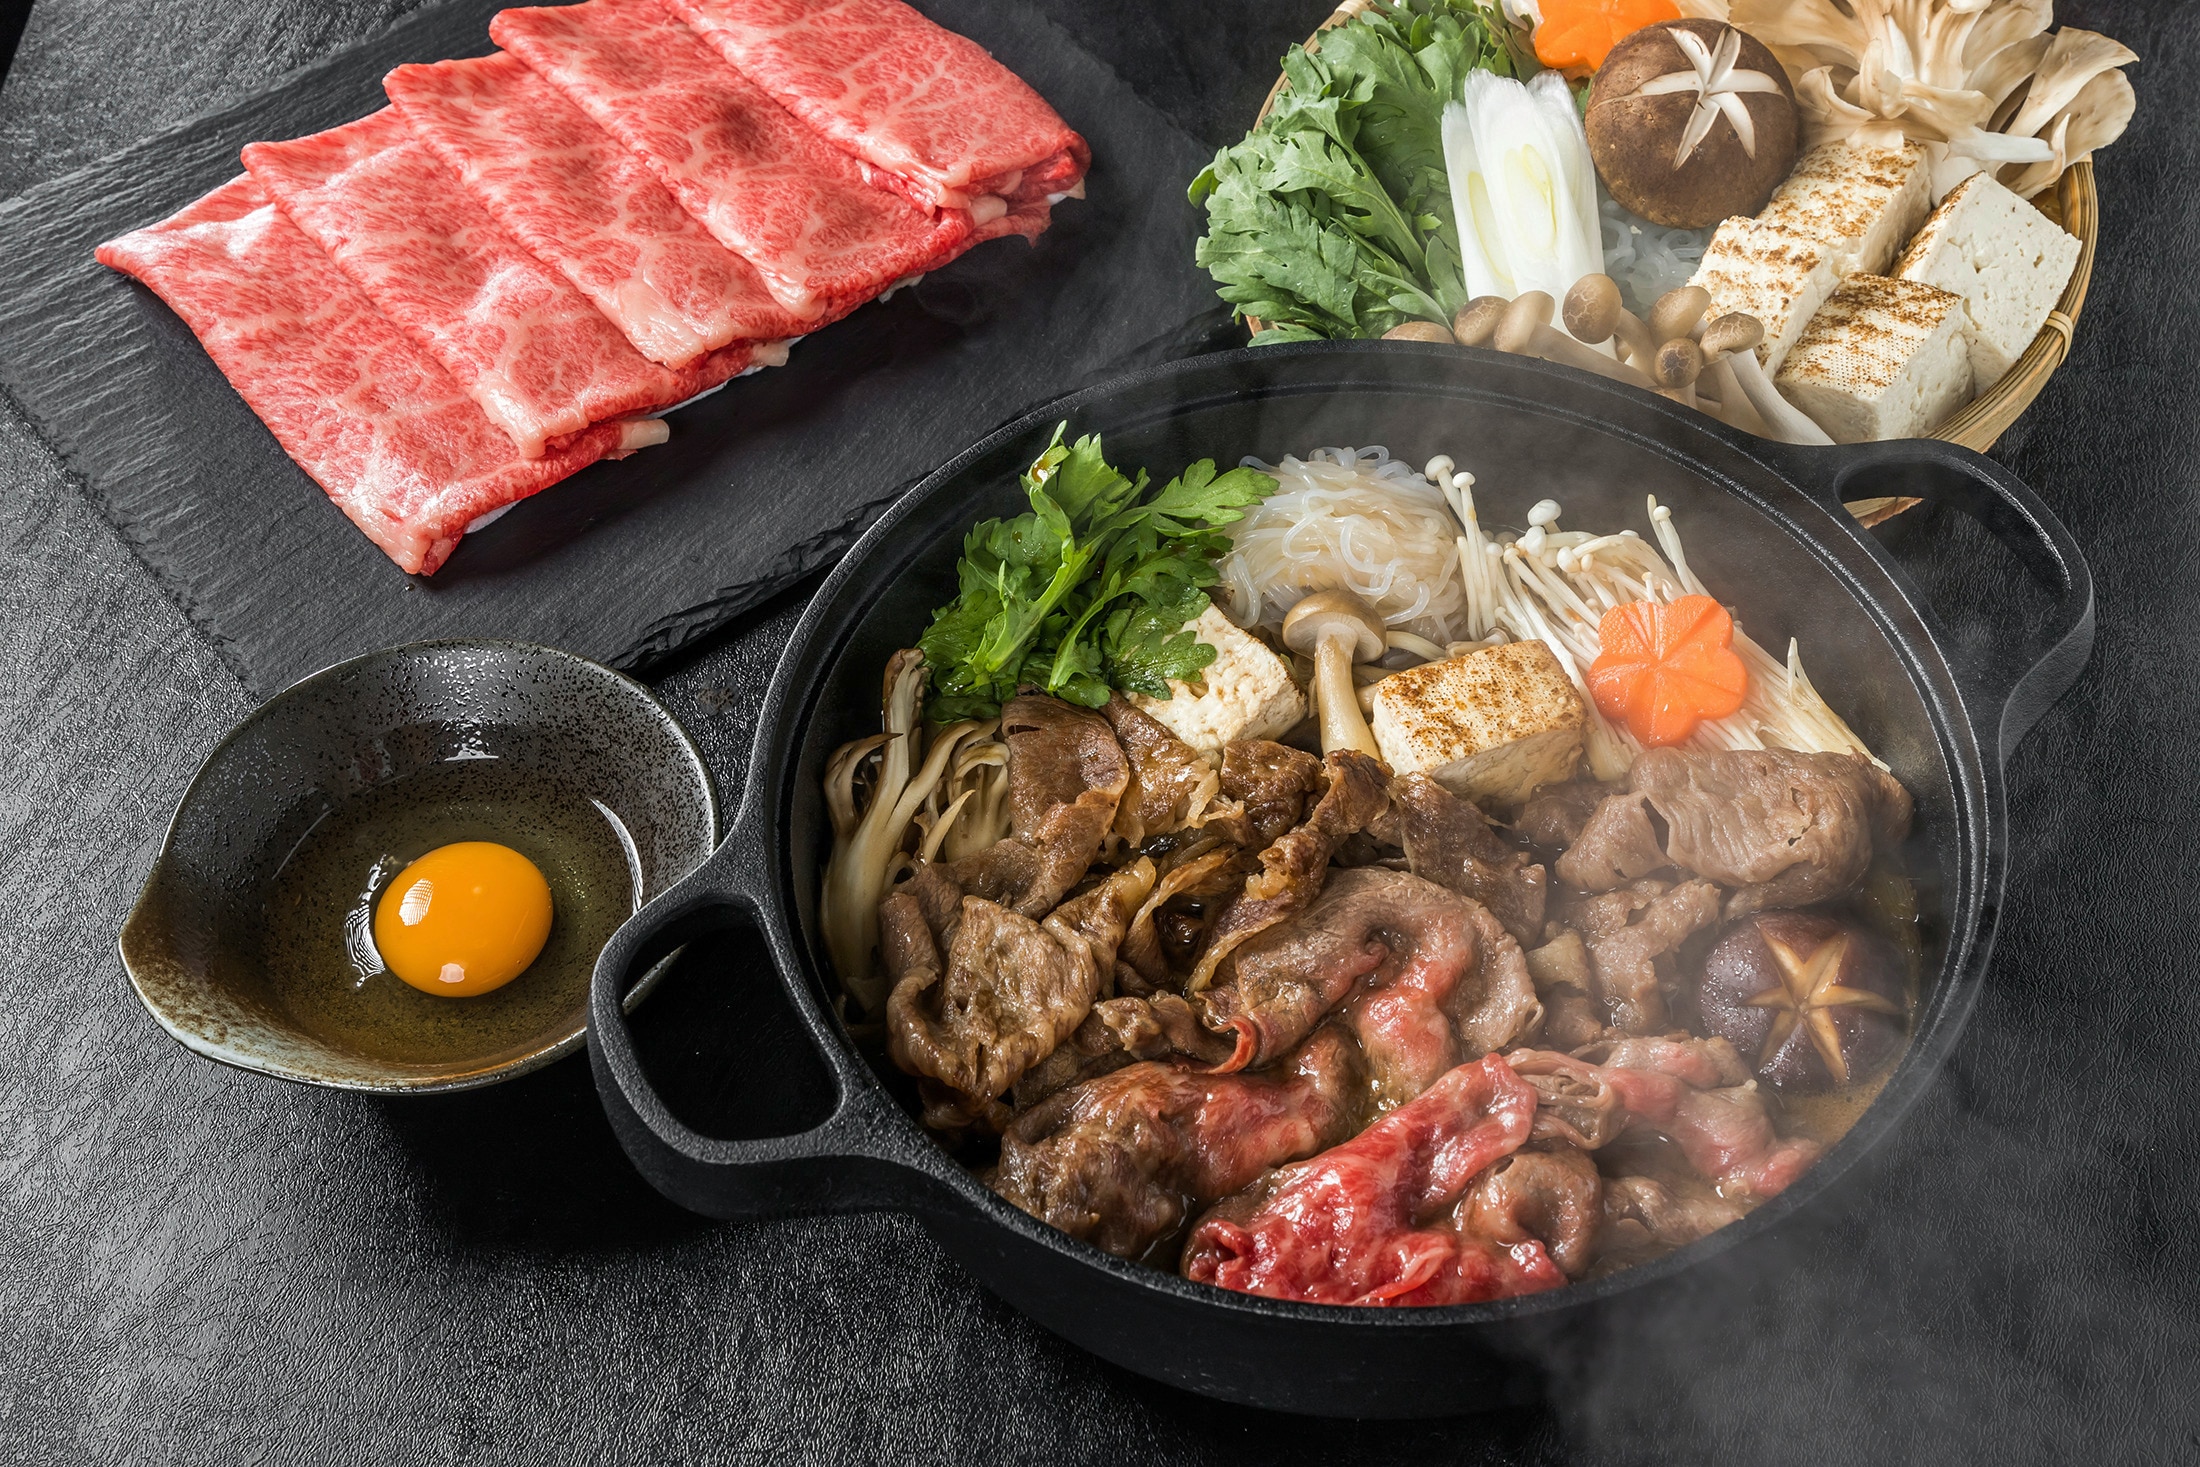 Sukiyaki in a cast-iron pan beside a saucer of raw egg and a platter of uncooked meat and vegetables